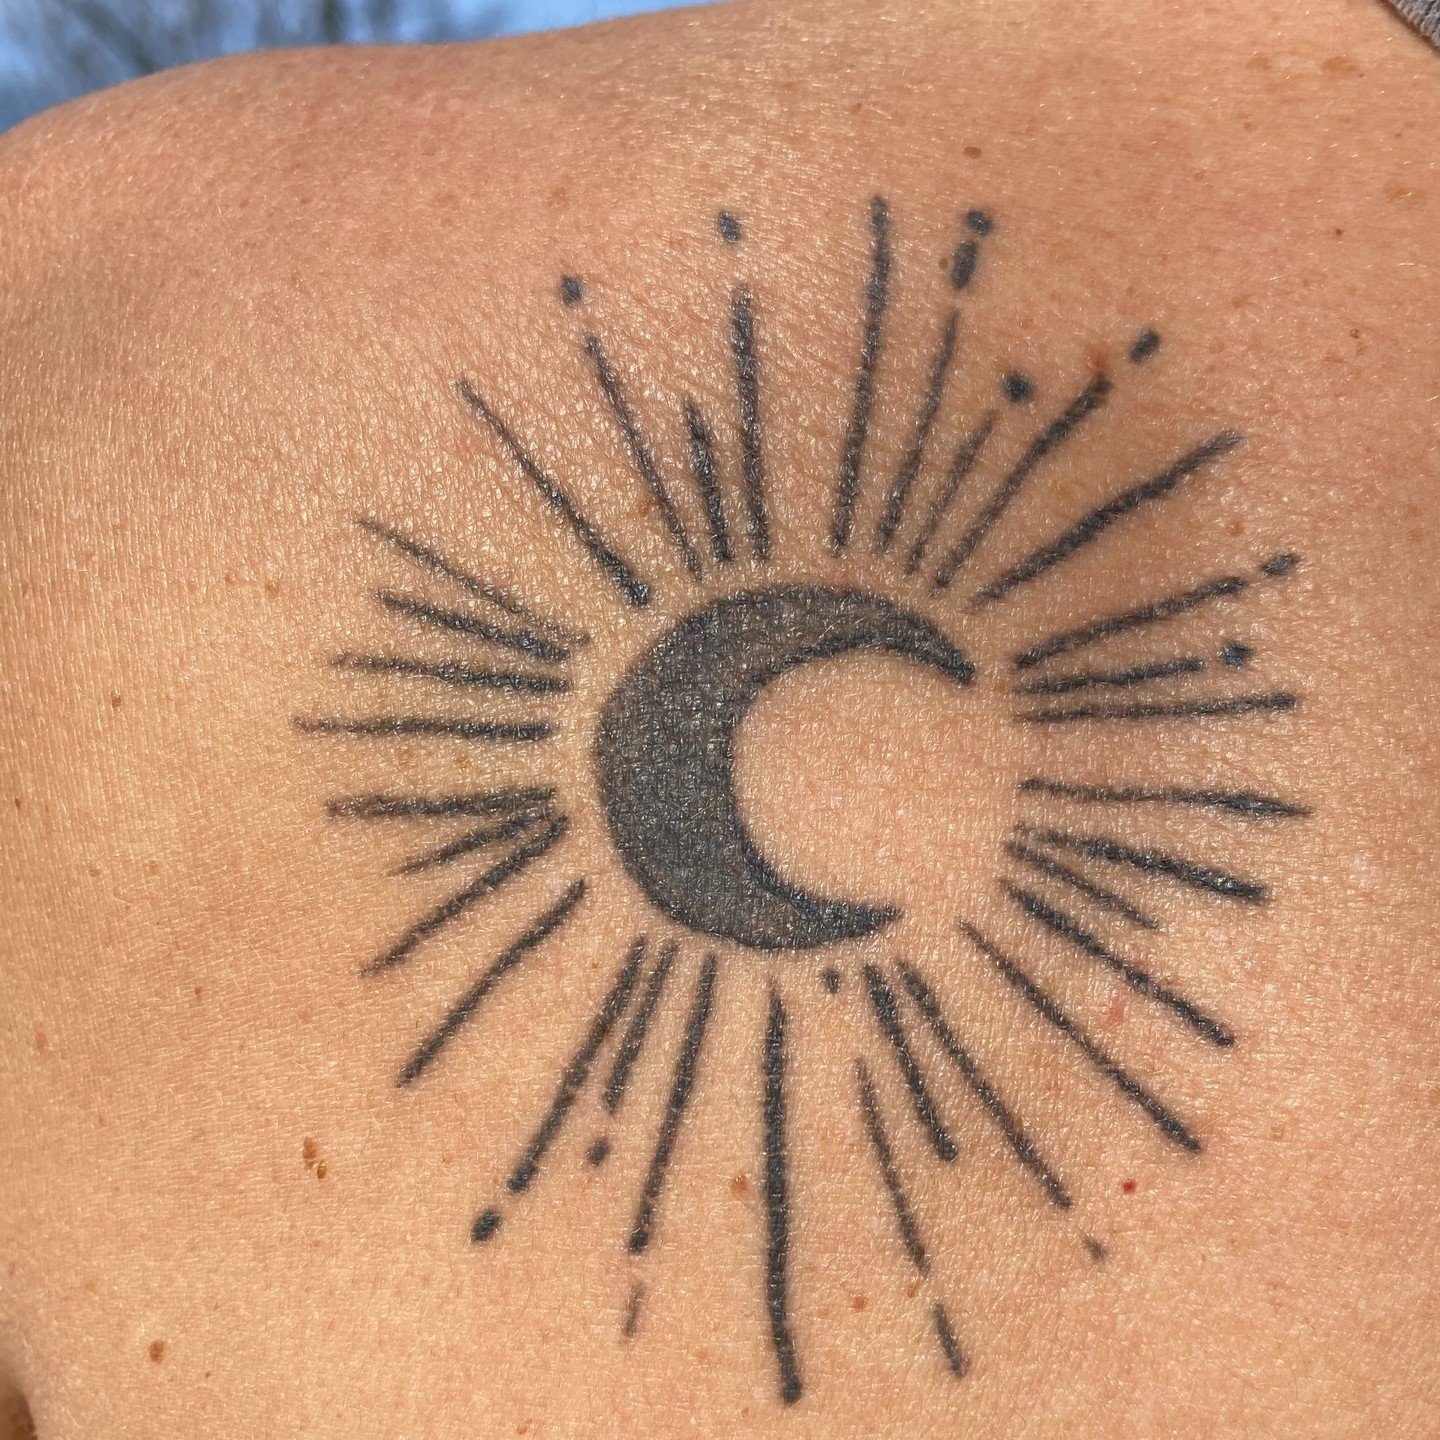 While the full totality wasn't in view near me, I enjoyed walking around Walden Pond with my love during the gently darkening eclipse. 

A few years ago when I turned 50, I gifted to myself this tattoo. This was what I wrote about it at the time: &qu